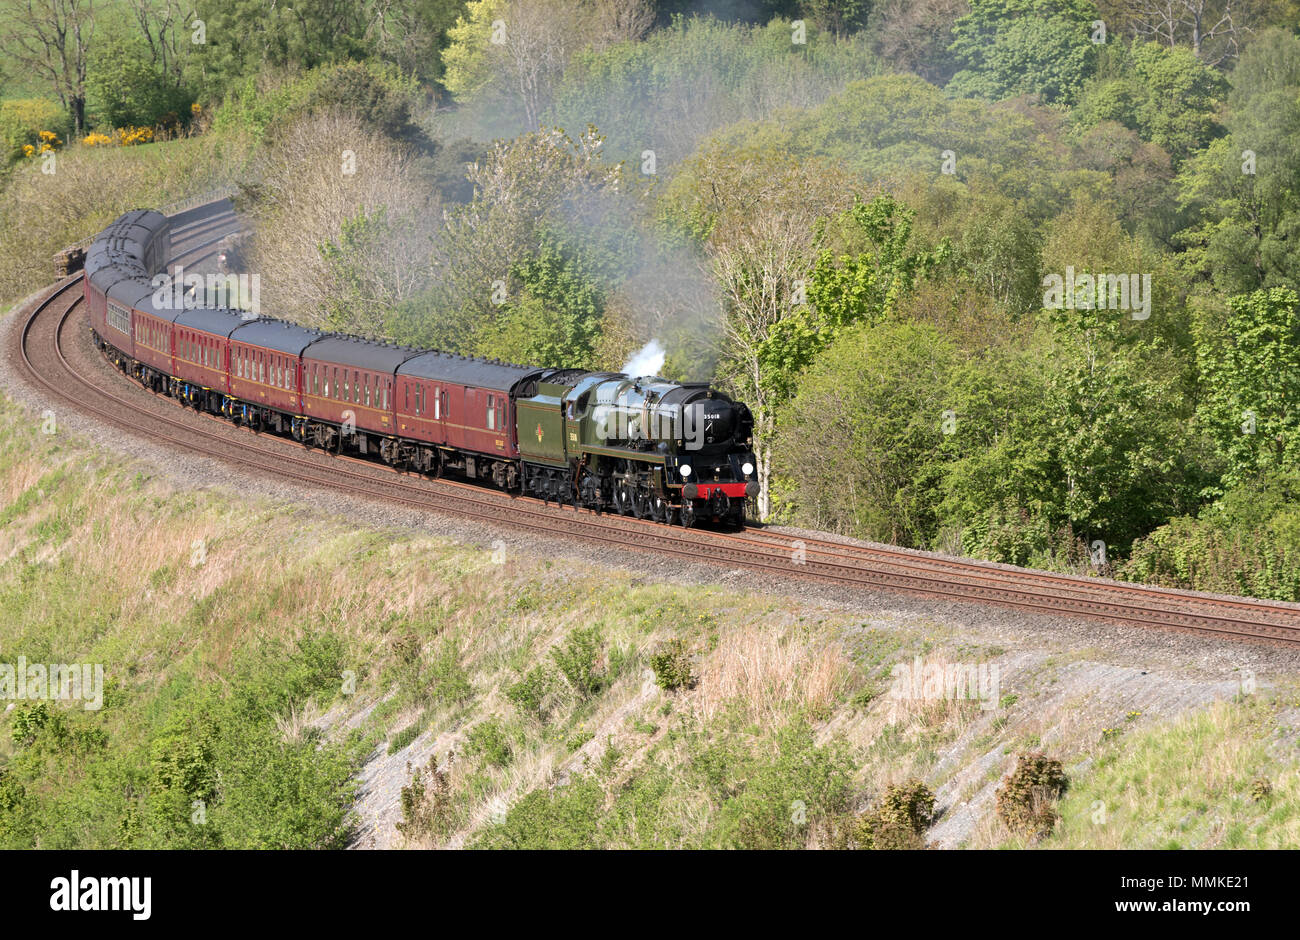 On a bright sunny summers day,Merchant Navy Class 'British India Line' steams through Cumbria near Armathwaite engine number 35018 on the Carlisle to Settle line. Stock Photo